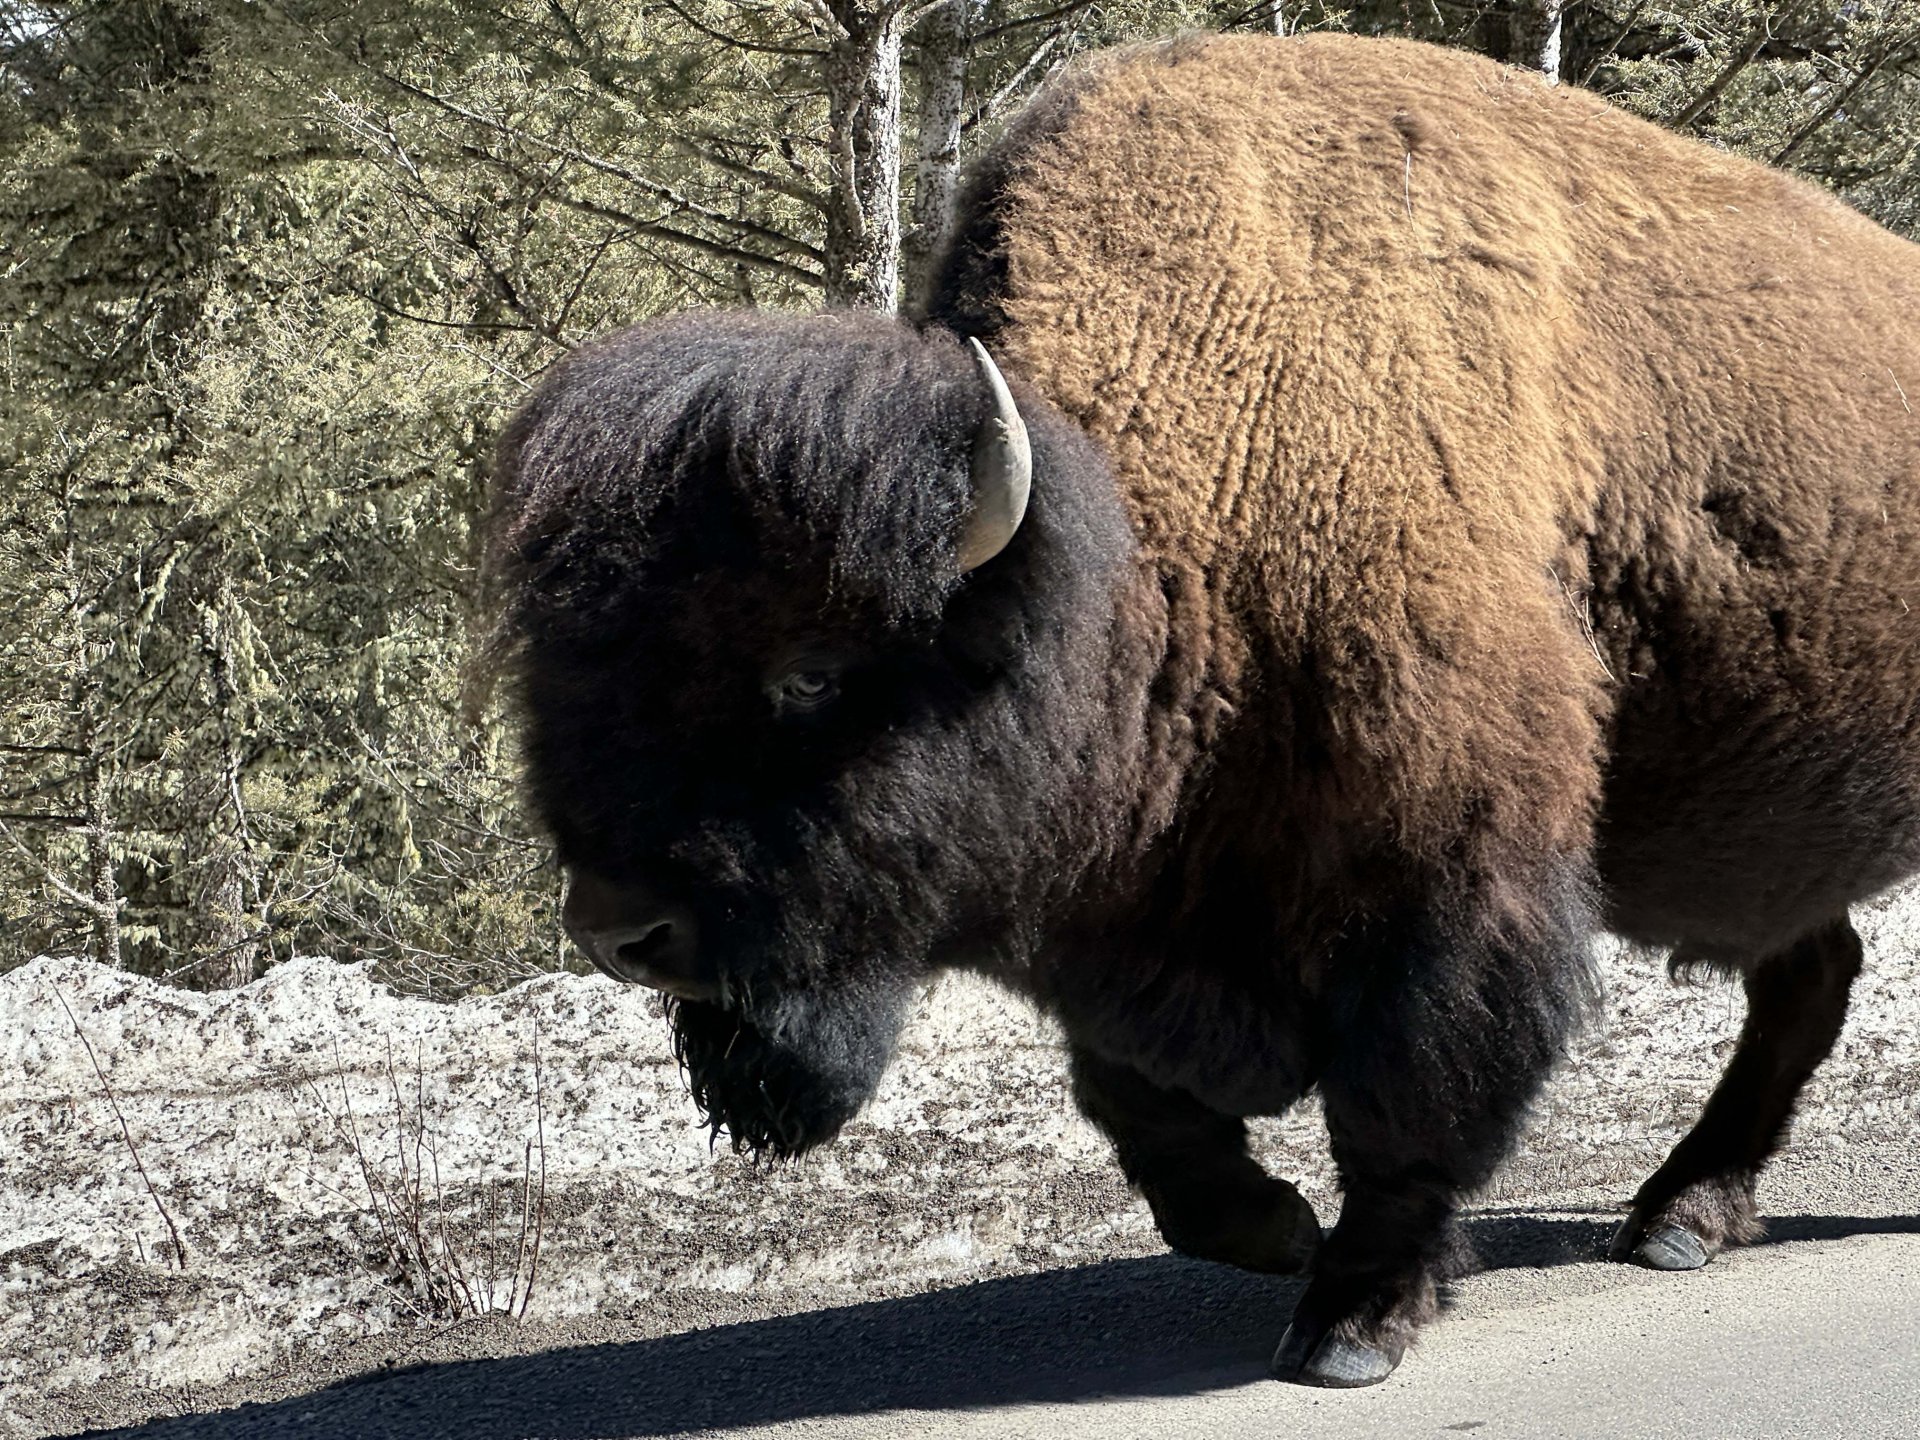 Big bison in Yellowstone